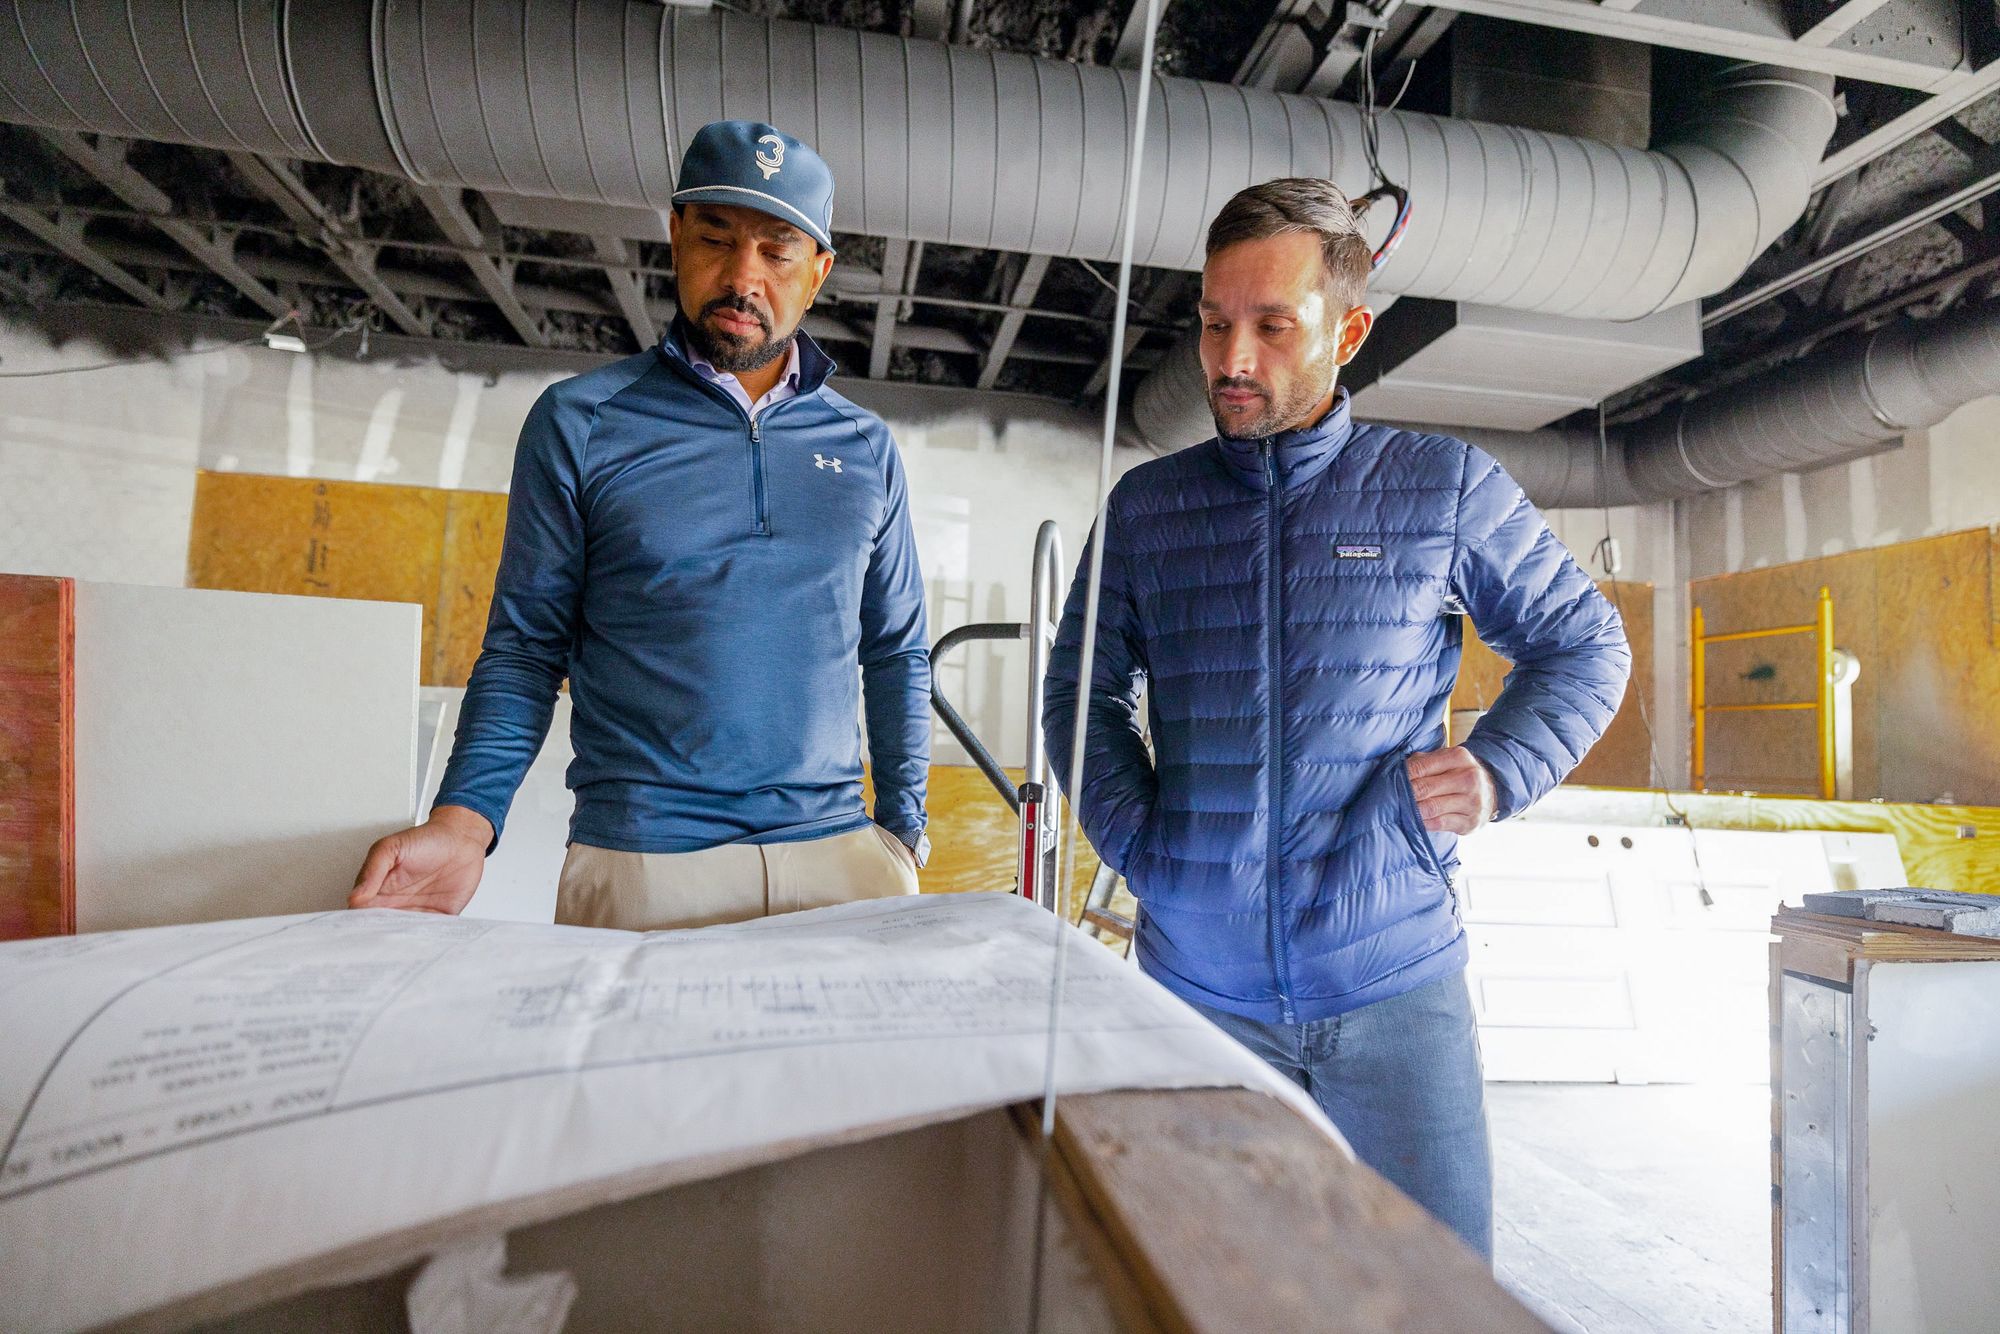 Two restaurant owners are looking at blueprints in an unfinished commercial space.